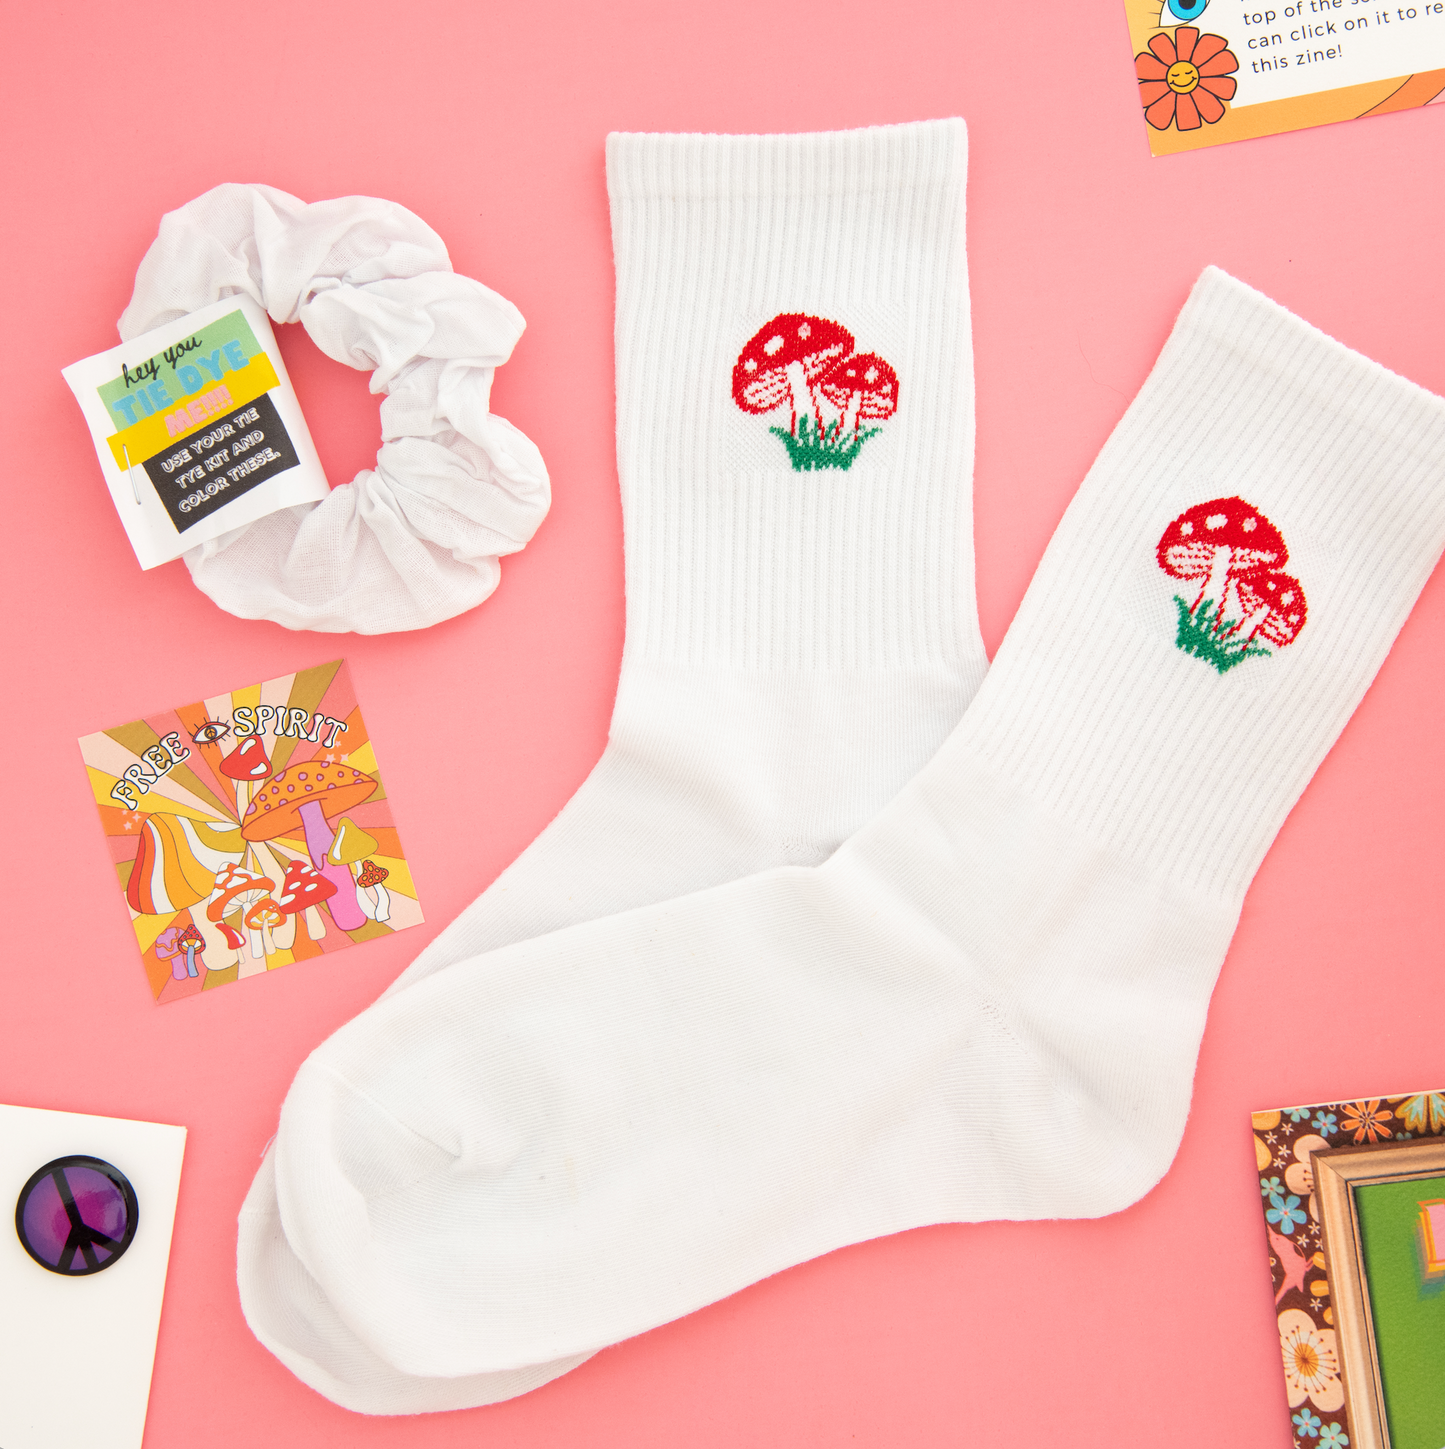 Hippie vibe subscription box with white socks featuring red mushrooms and green grass, free spirit square sticker, purple peace sign pin, and white scrunchie. Perfect for bohemian and free-spirited individuals